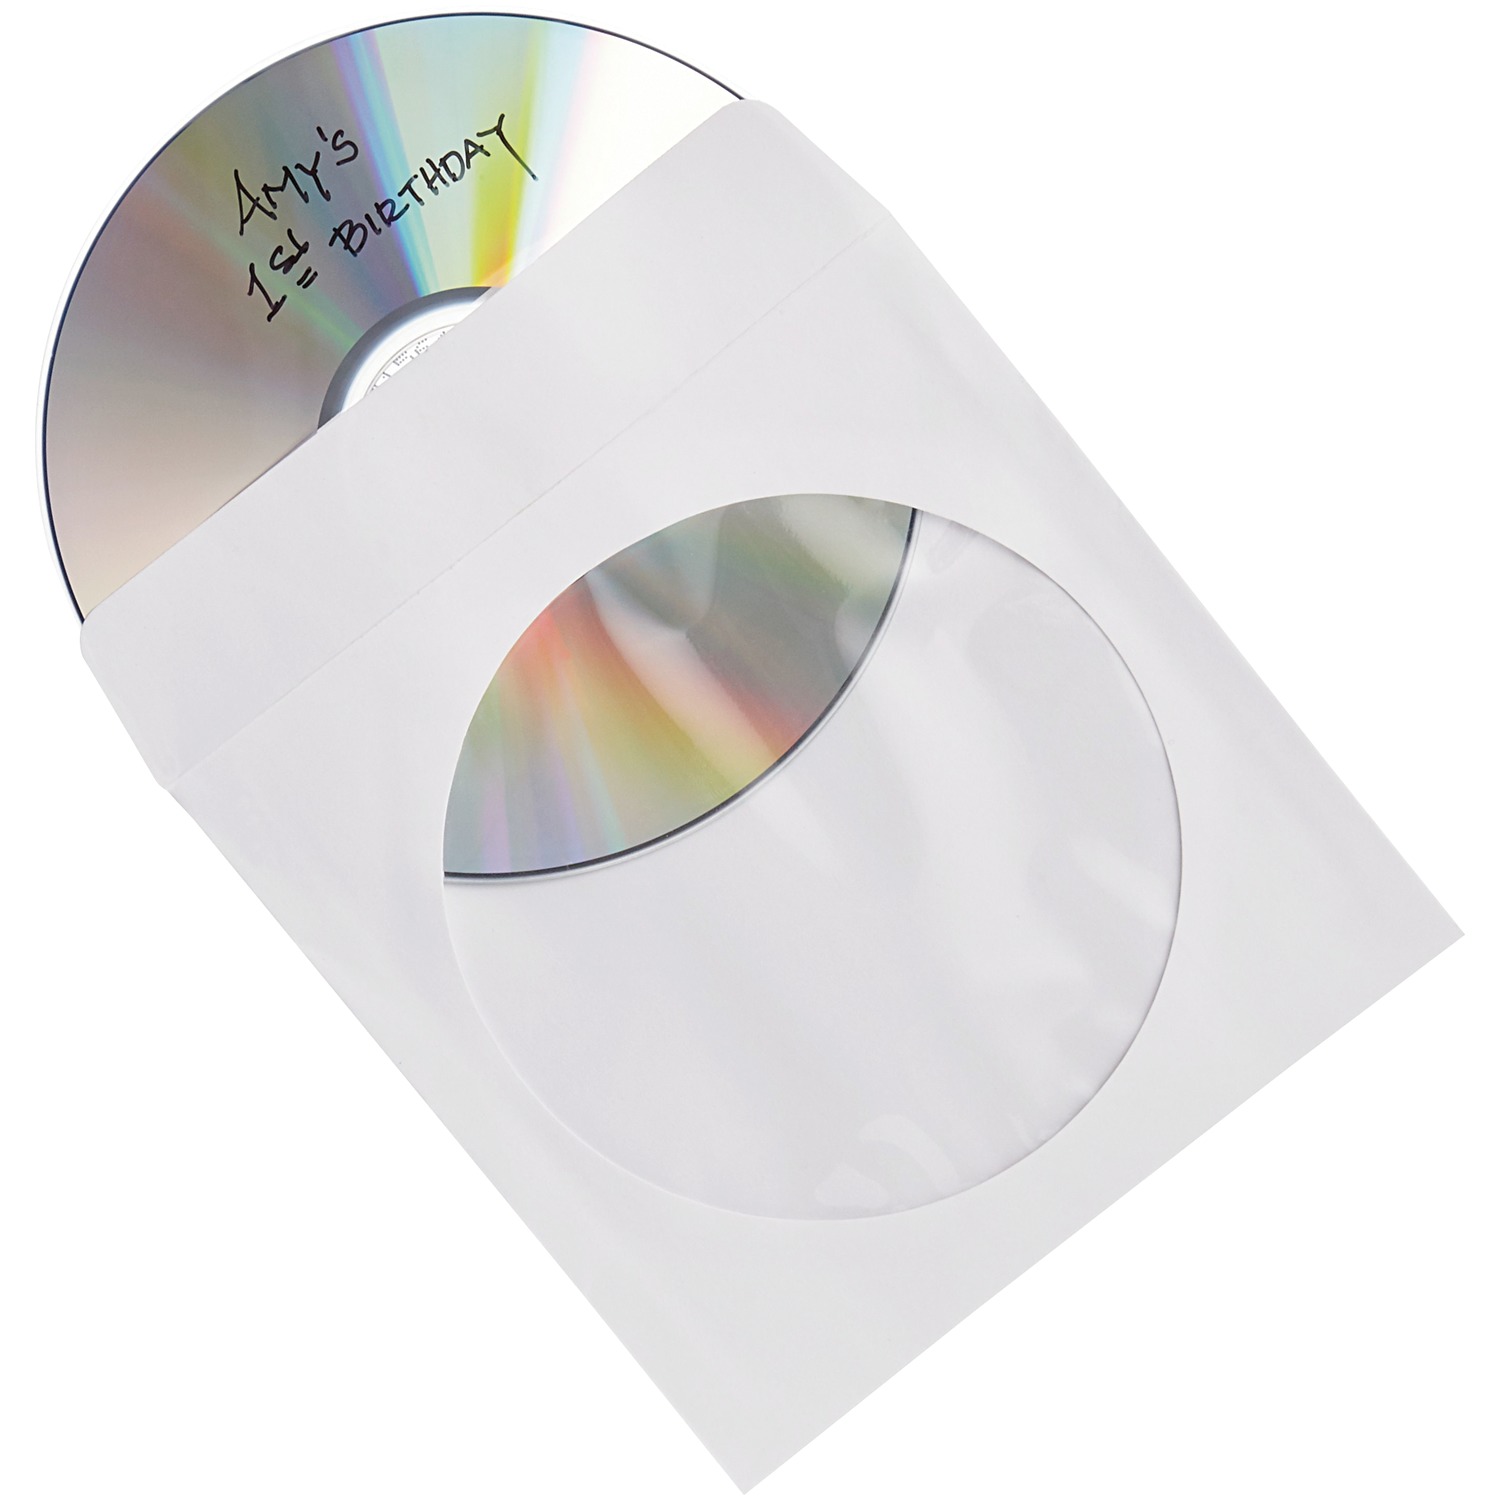 Verbatim 95102 4.7GB DVD-RS 100-Count Spindle and CD/DVD Paper Sleeves with Clear Window, 100-Pack - image 2 of 4